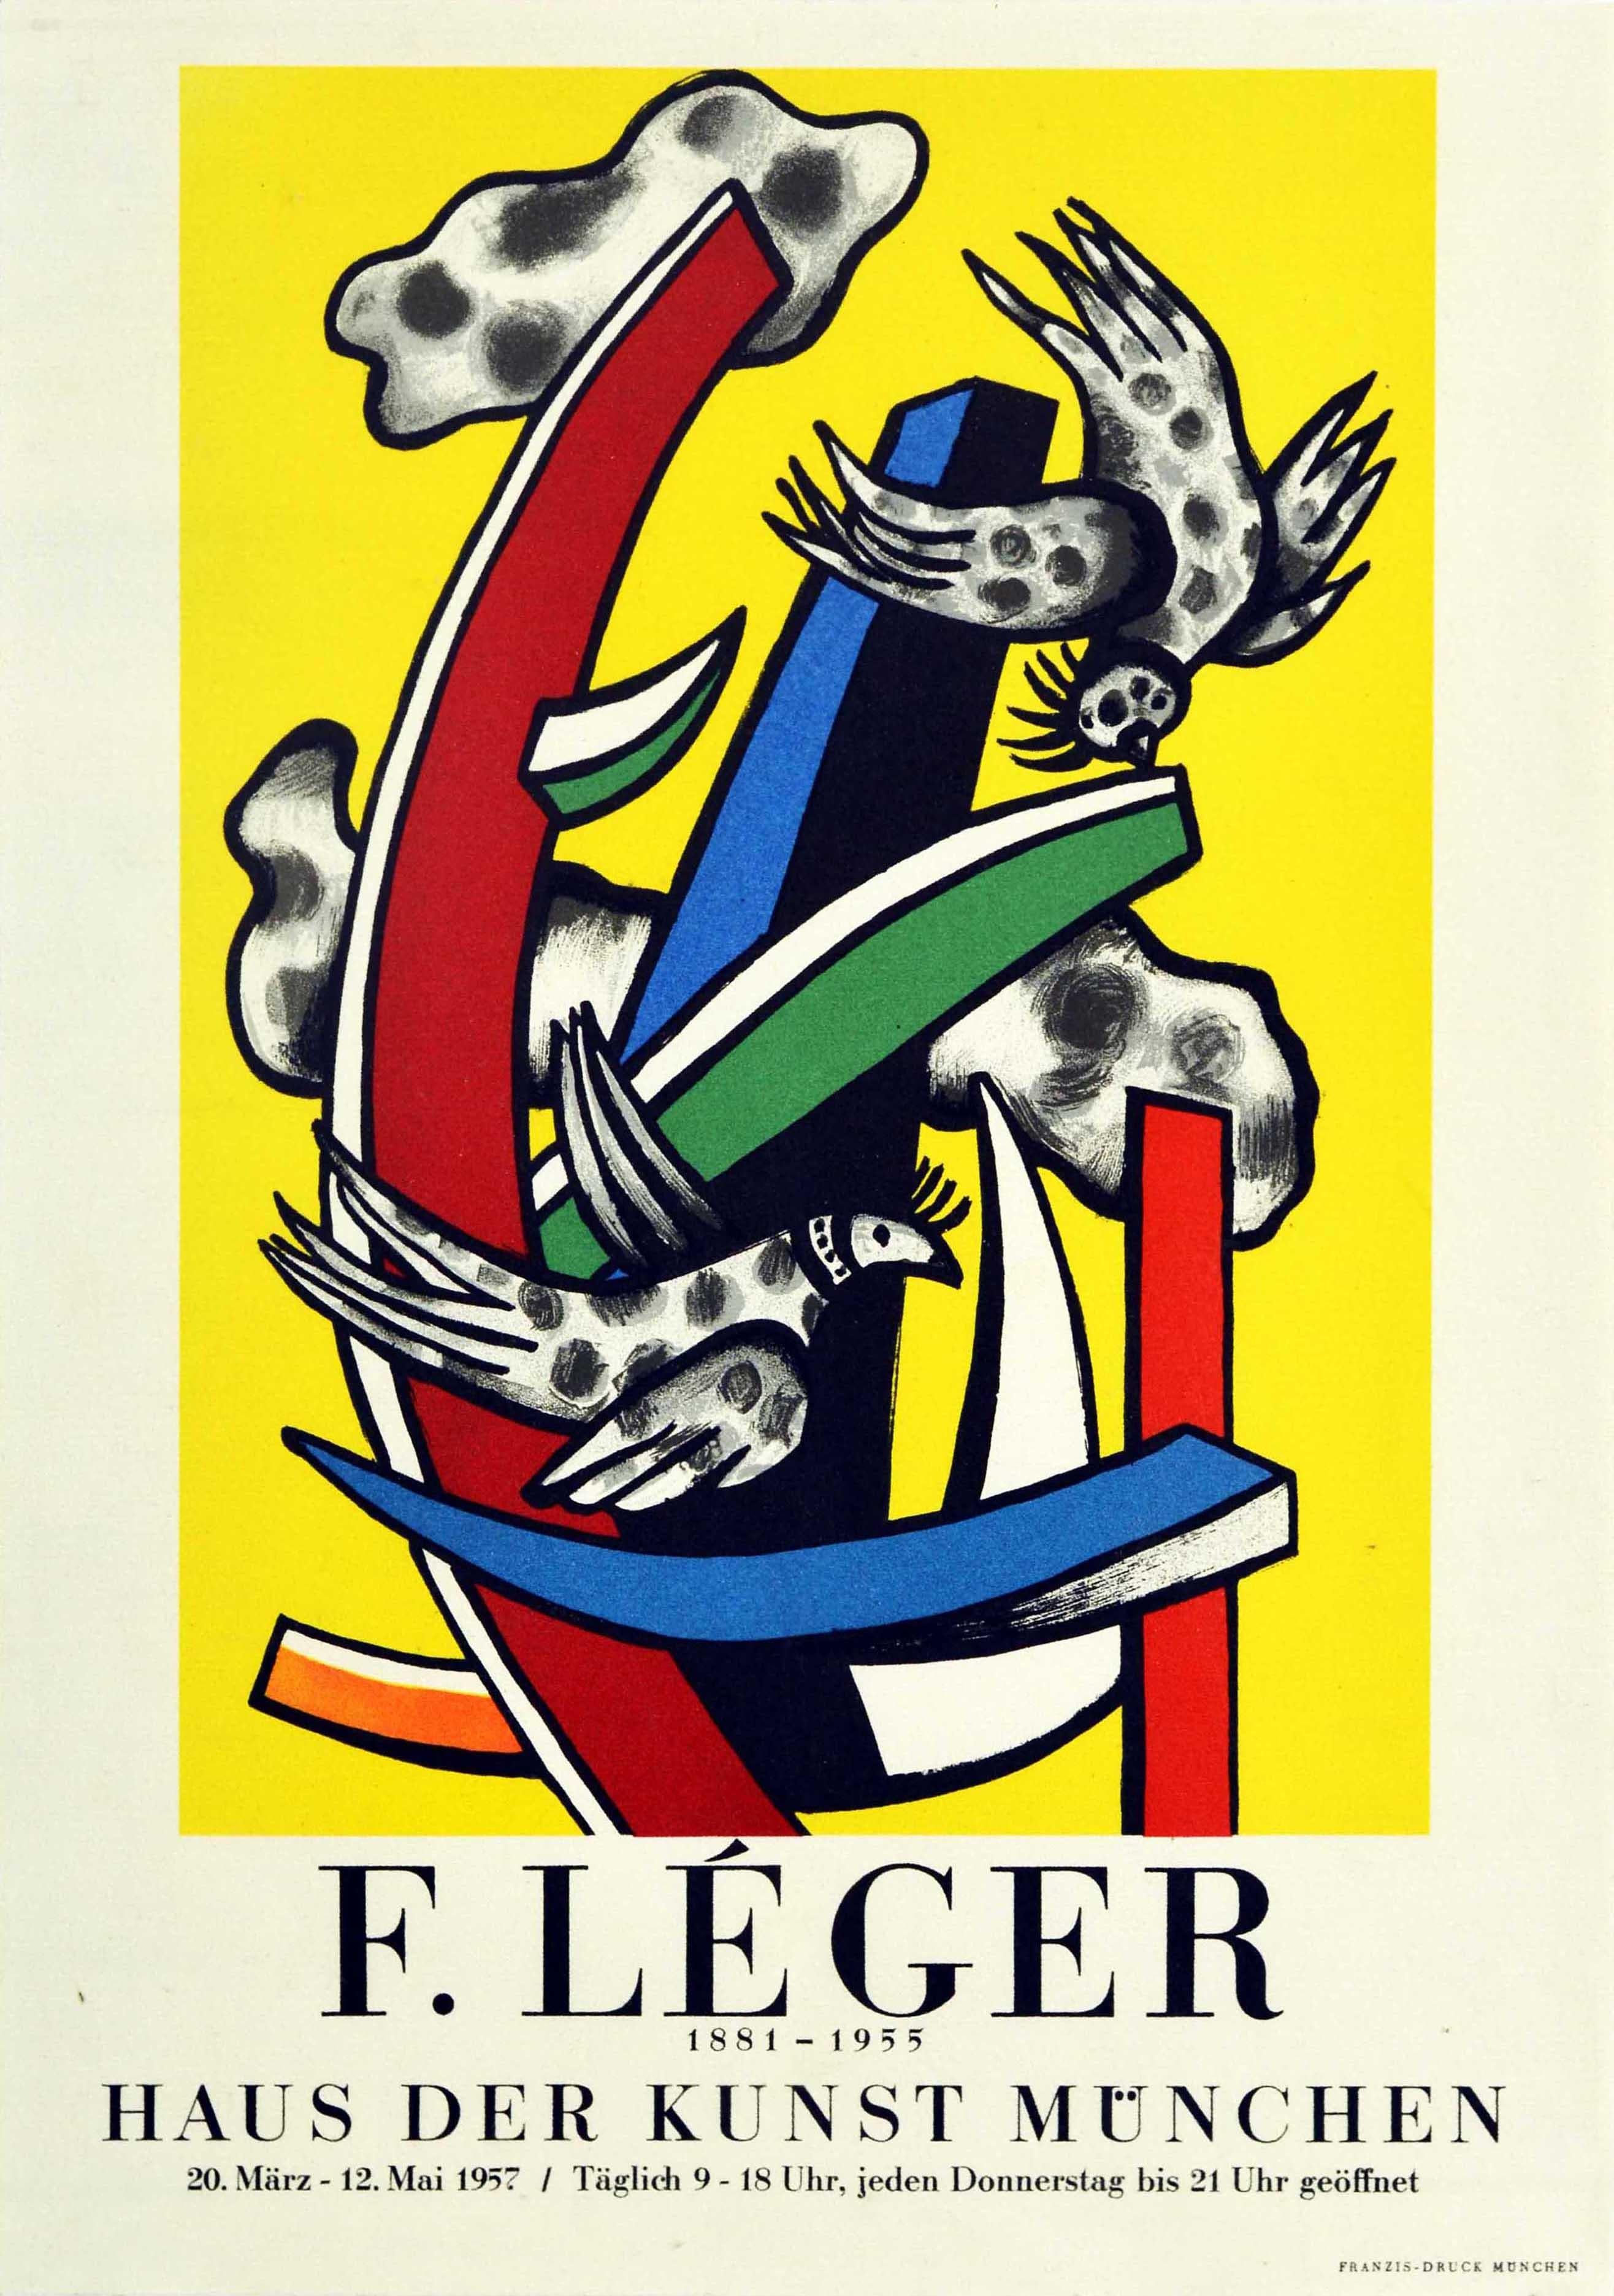 Original vintage advertising poster for an exhibition of work by Fernand Leger (1881-1955) held at the Haus der Kunst Munchen from 20 March to 12 May 1957. The poster features a colourful design by Leger titled Les Oiseaux sur Fond Jaune / Birds on